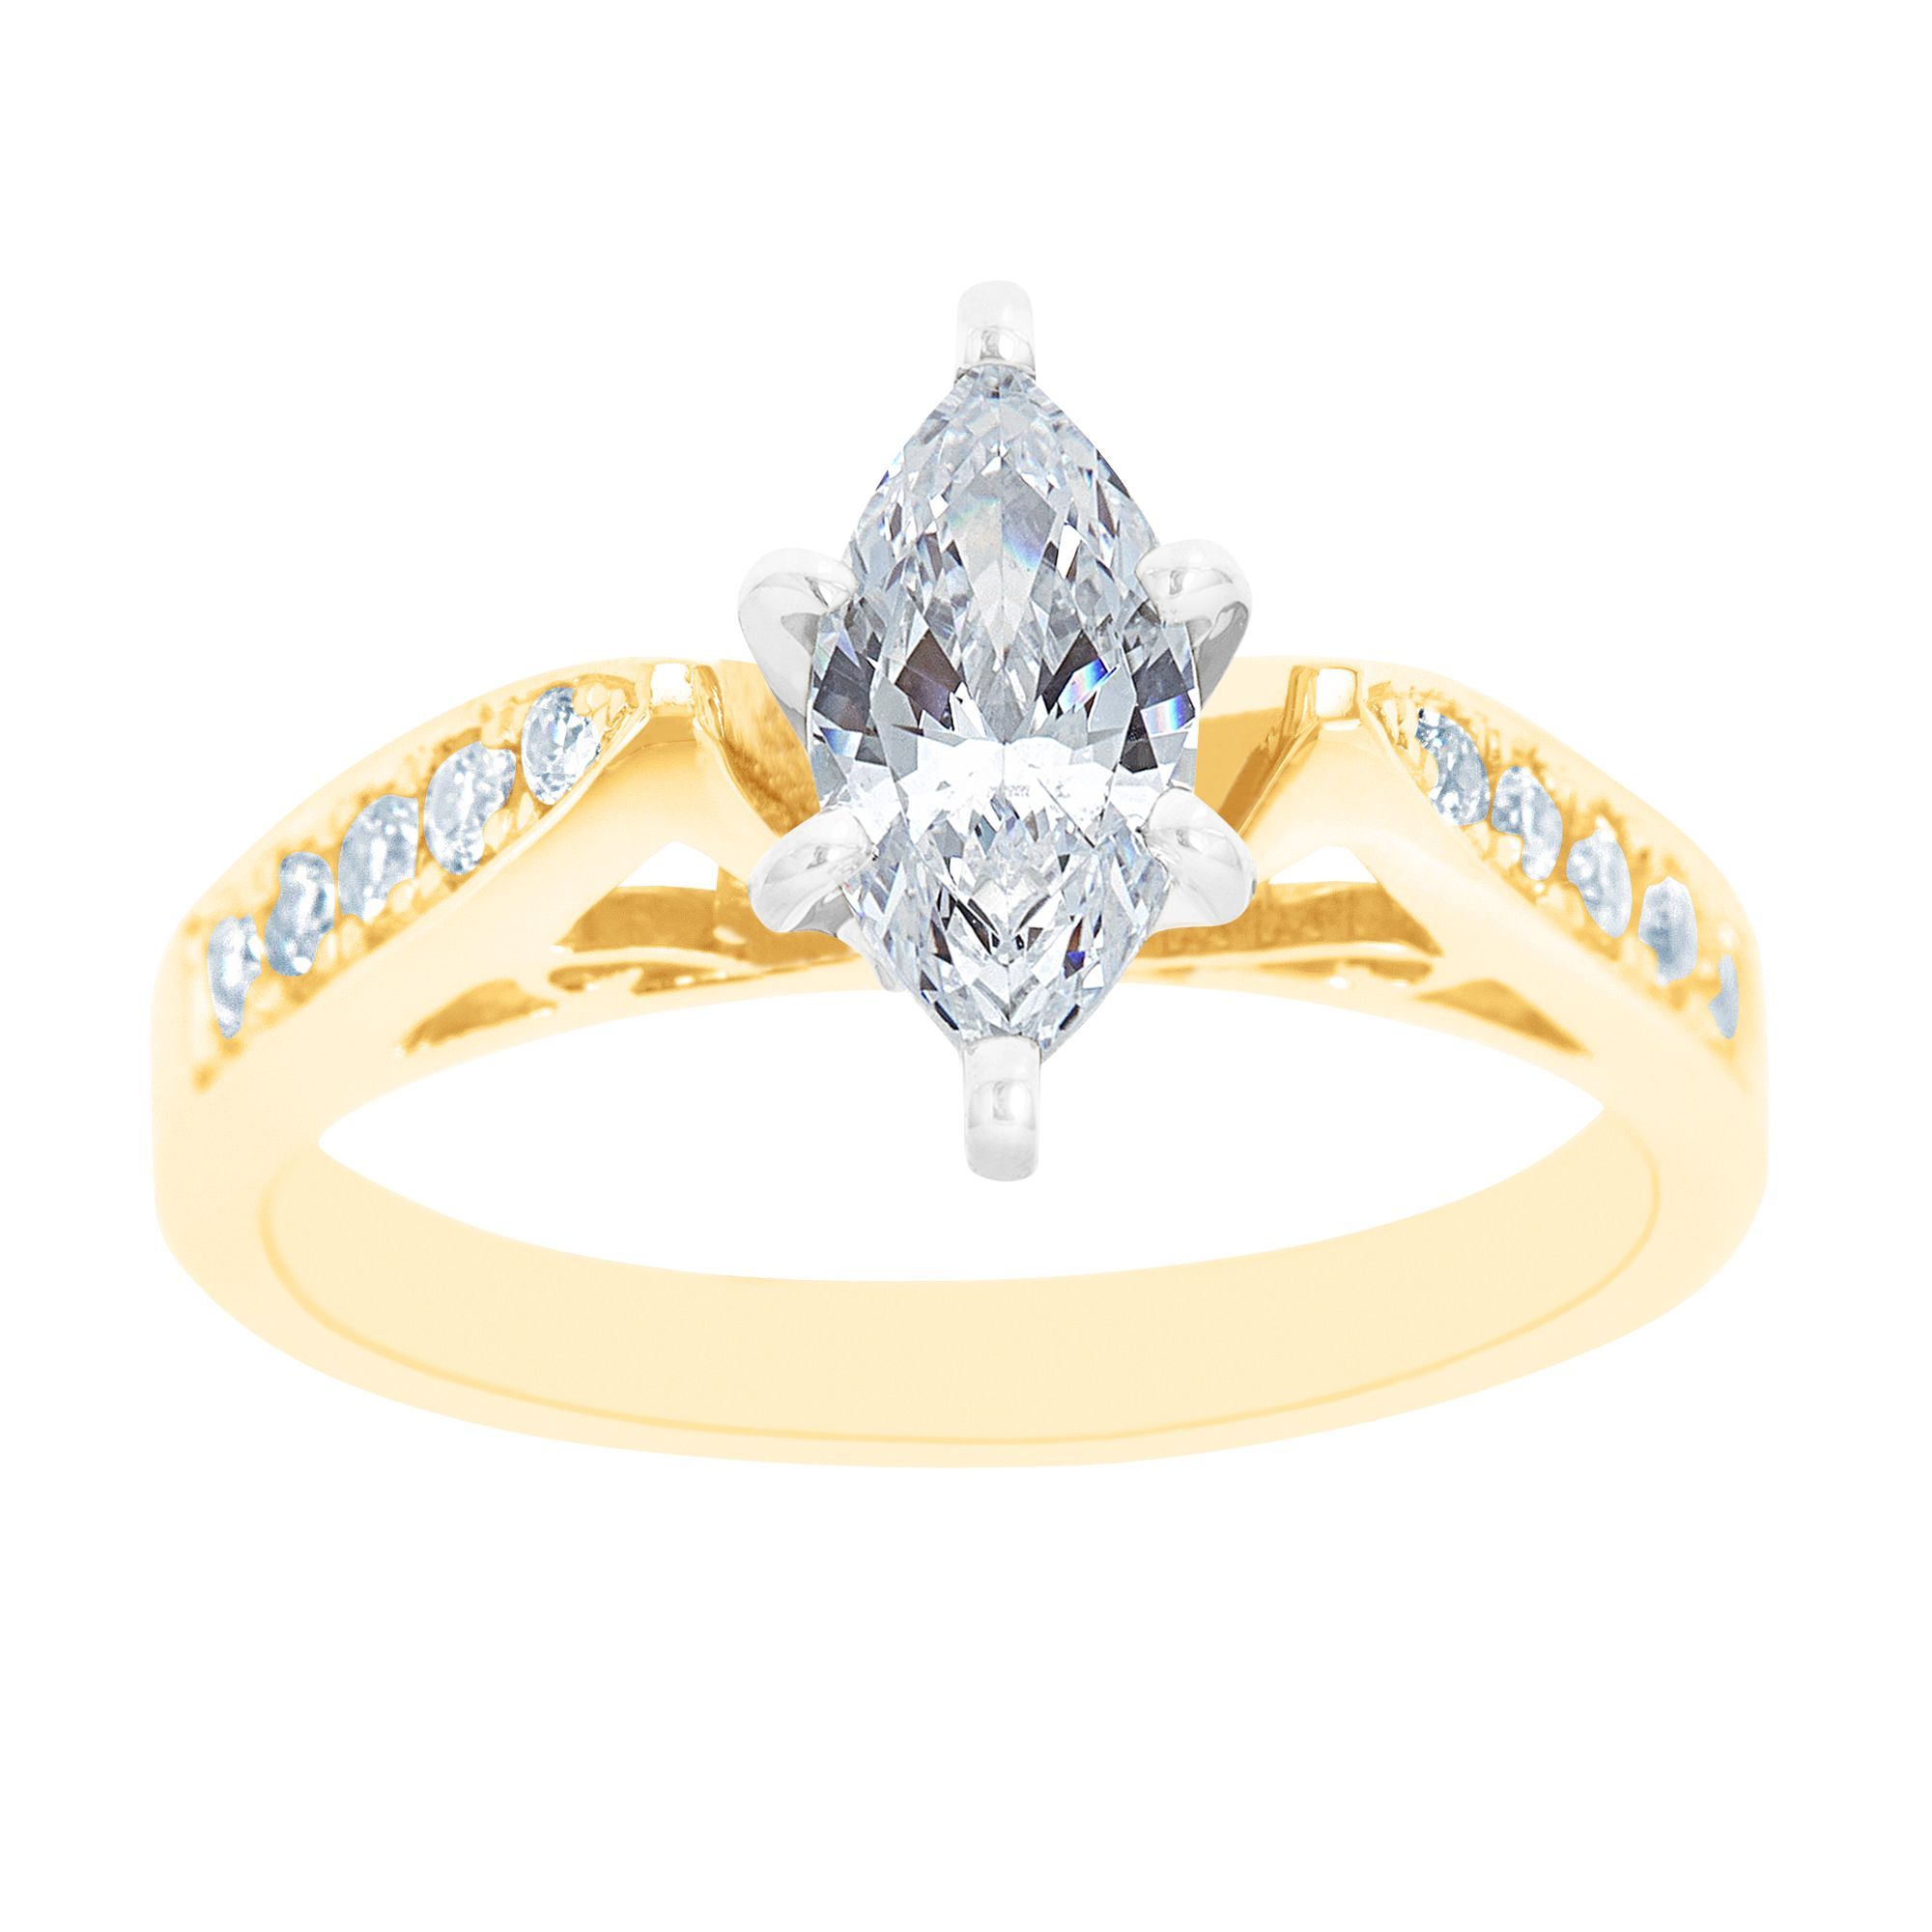 New York City Diamond District 14K Two Tone Marquise Certified Diamond Engagement Ring